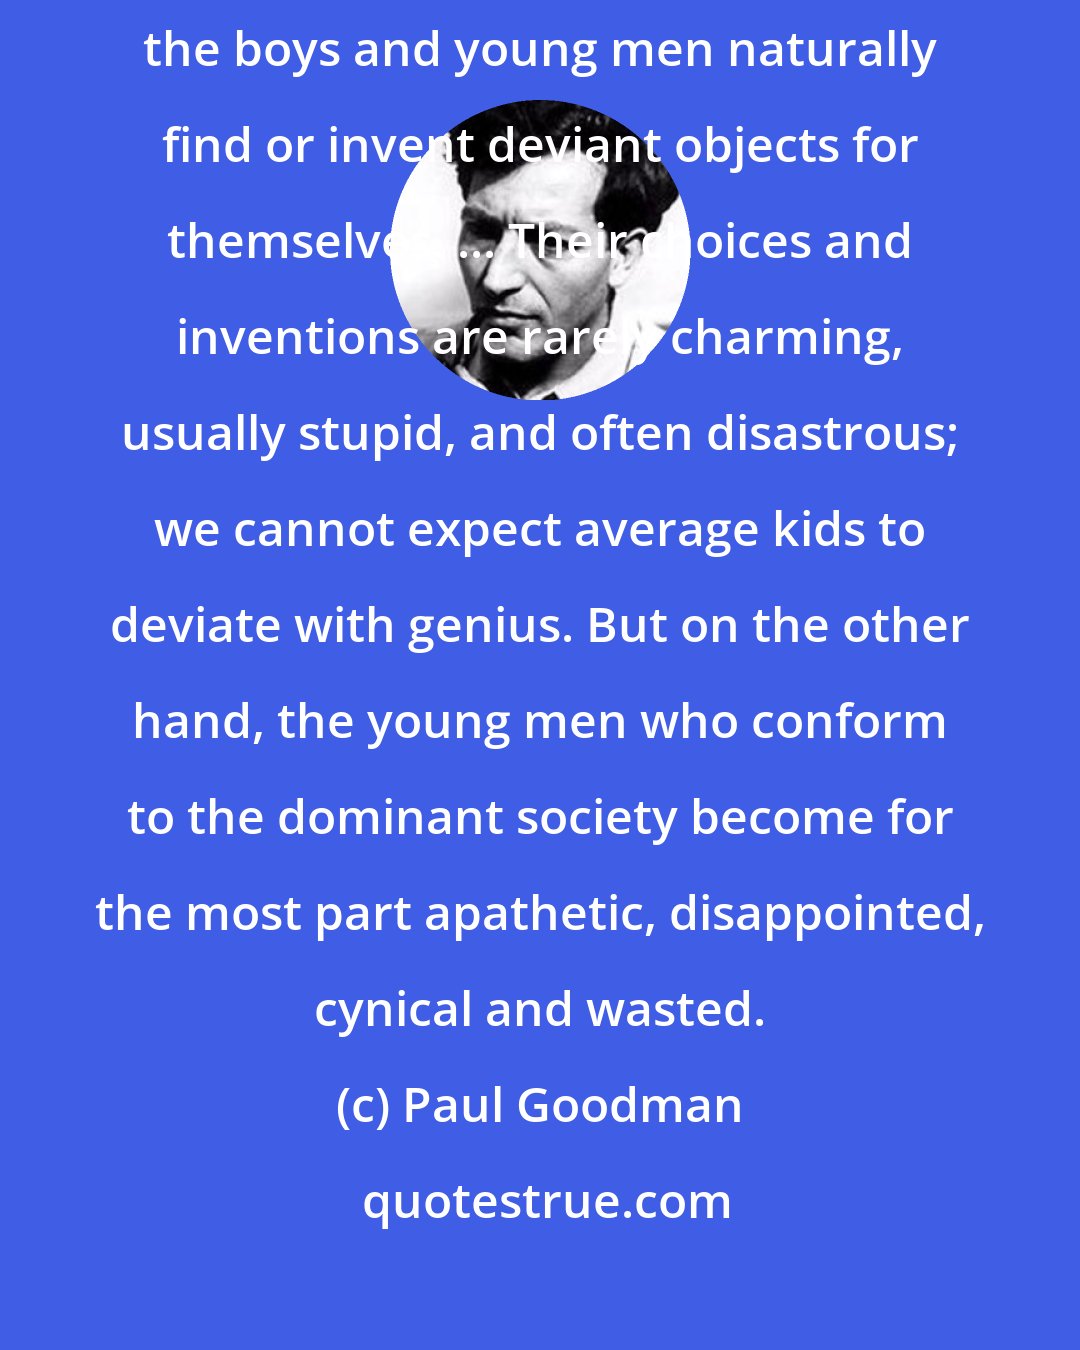 Paul Goodman: Thwarted, or starved, in the important objects proper to young capacities, the boys and young men naturally find or invent deviant objects for themselves. ... Their choices and inventions are rarely charming, usually stupid, and often disastrous; we cannot expect average kids to deviate with genius. But on the other hand, the young men who conform to the dominant society become for the most part apathetic, disappointed, cynical and wasted.